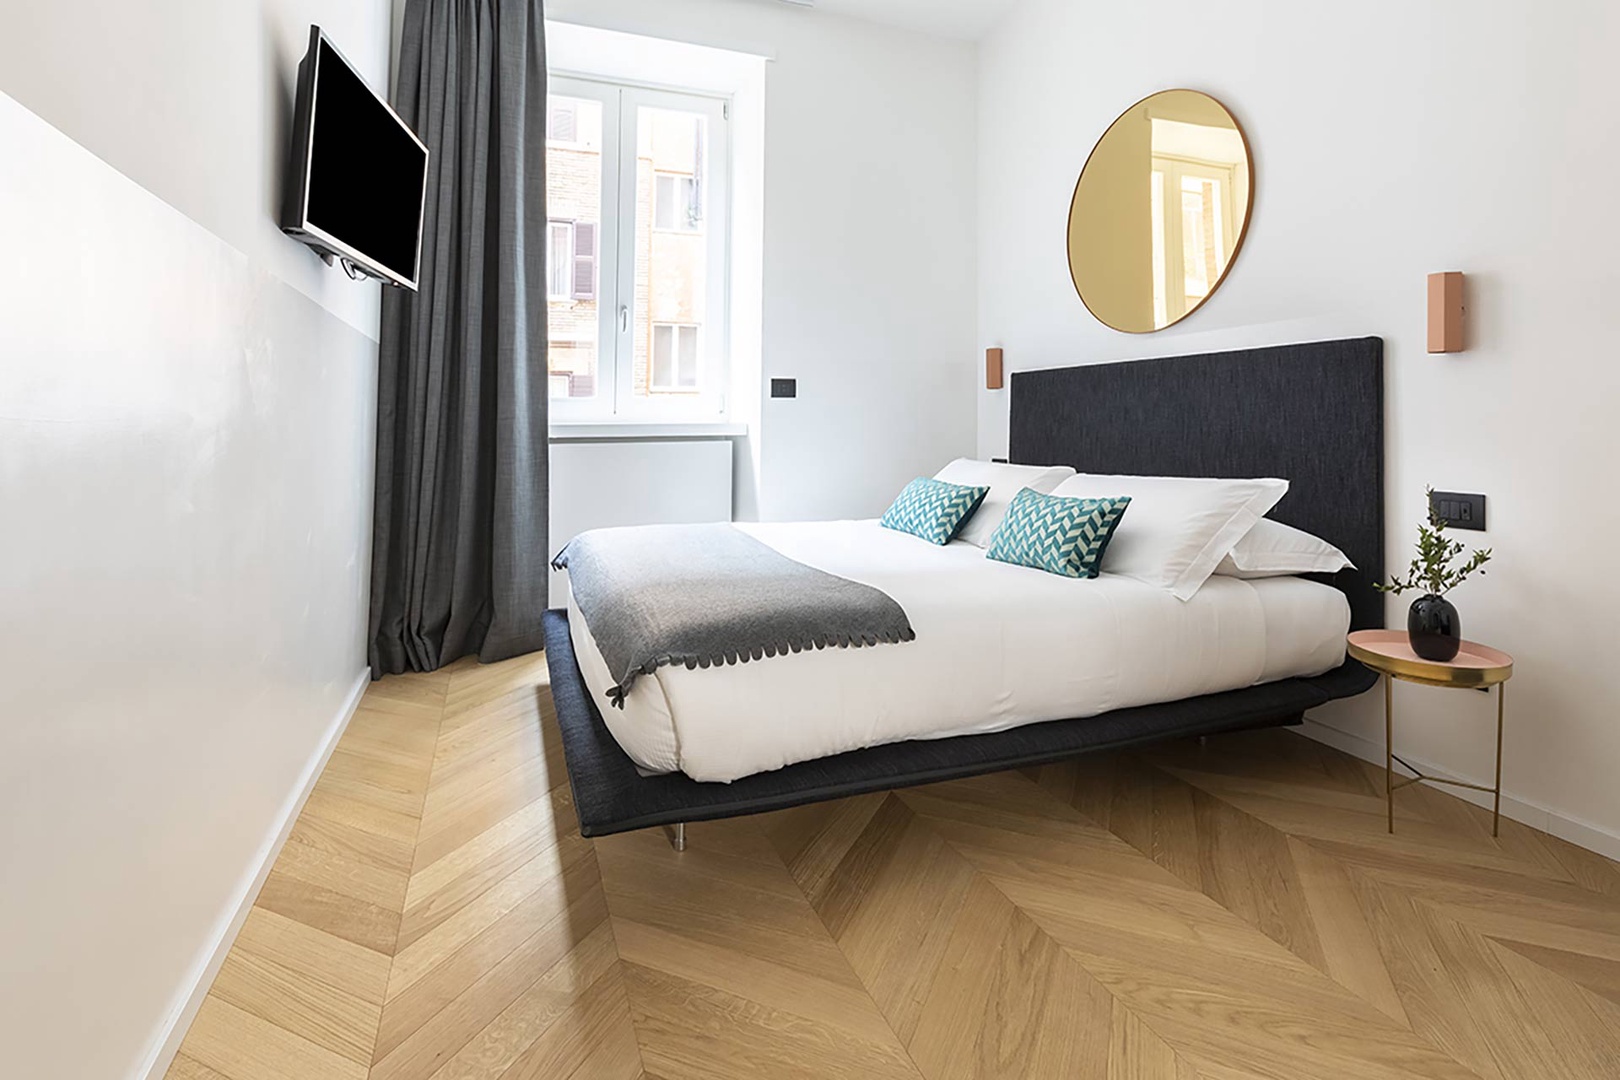 The beautiful French barbed floors can be enjoyed in the bedrooms as well.